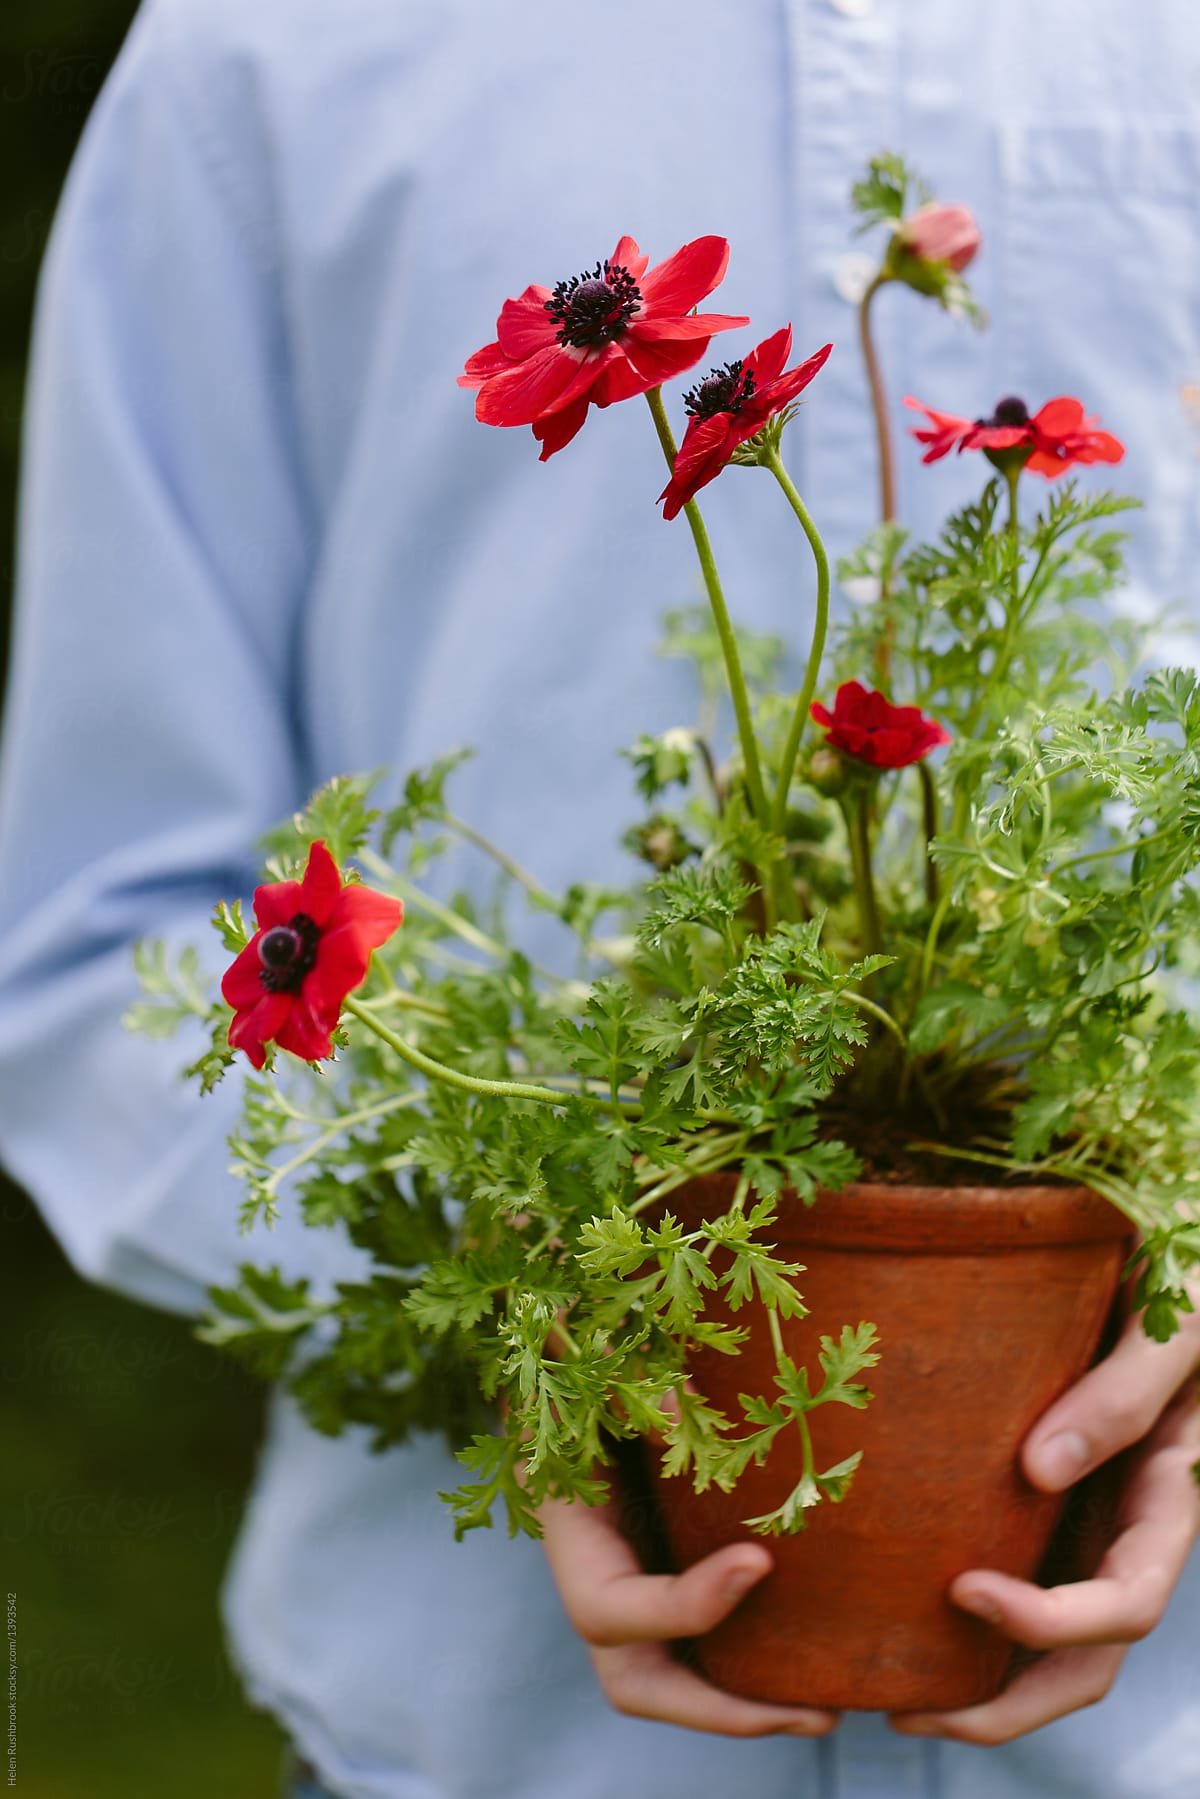 Hands Holding A Red Anemone Flower In A Clay Pot.